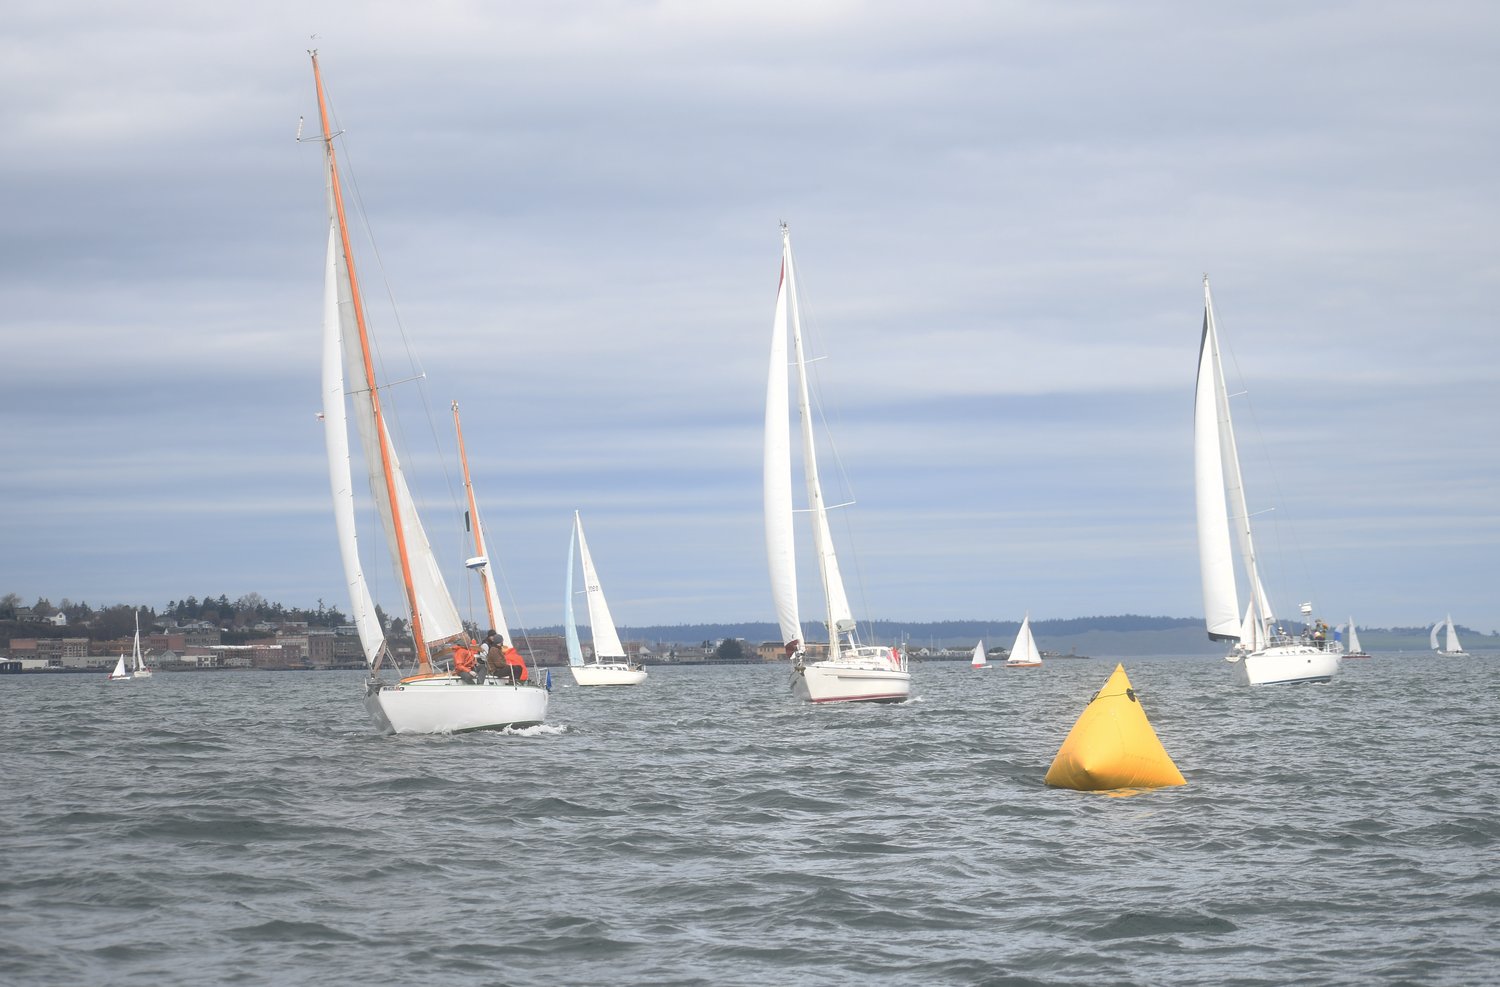 Rounding the Reach mark buoy near Boat Haven Marina, sailboats glide onwards in Shipwright’s Regatta race. A total of 35 boats participated in the event.